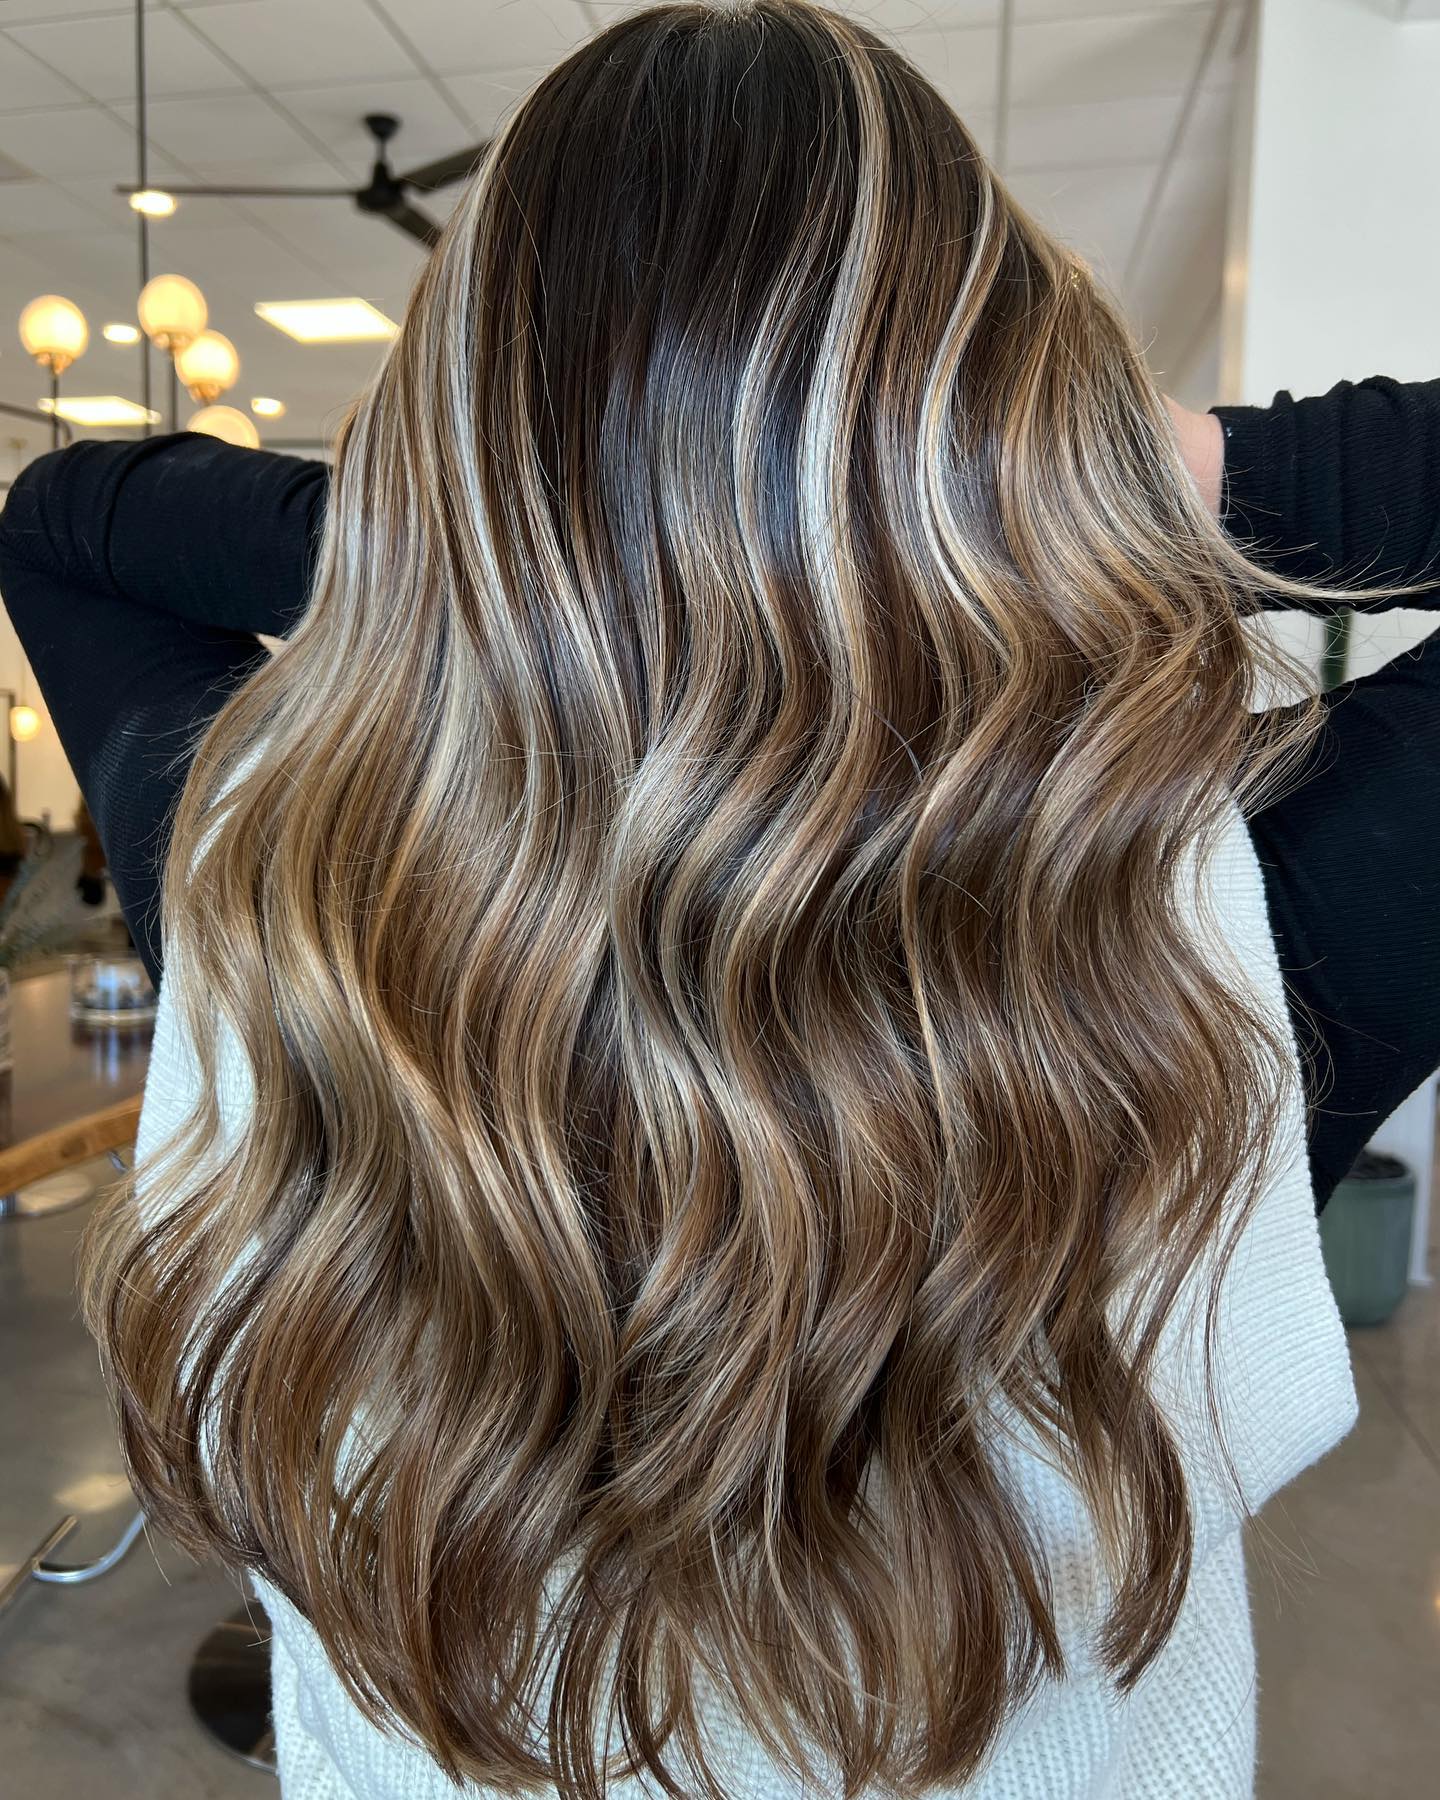 Coffee Brown Lowlights and Blonde Highlights on Long Wavy Hair